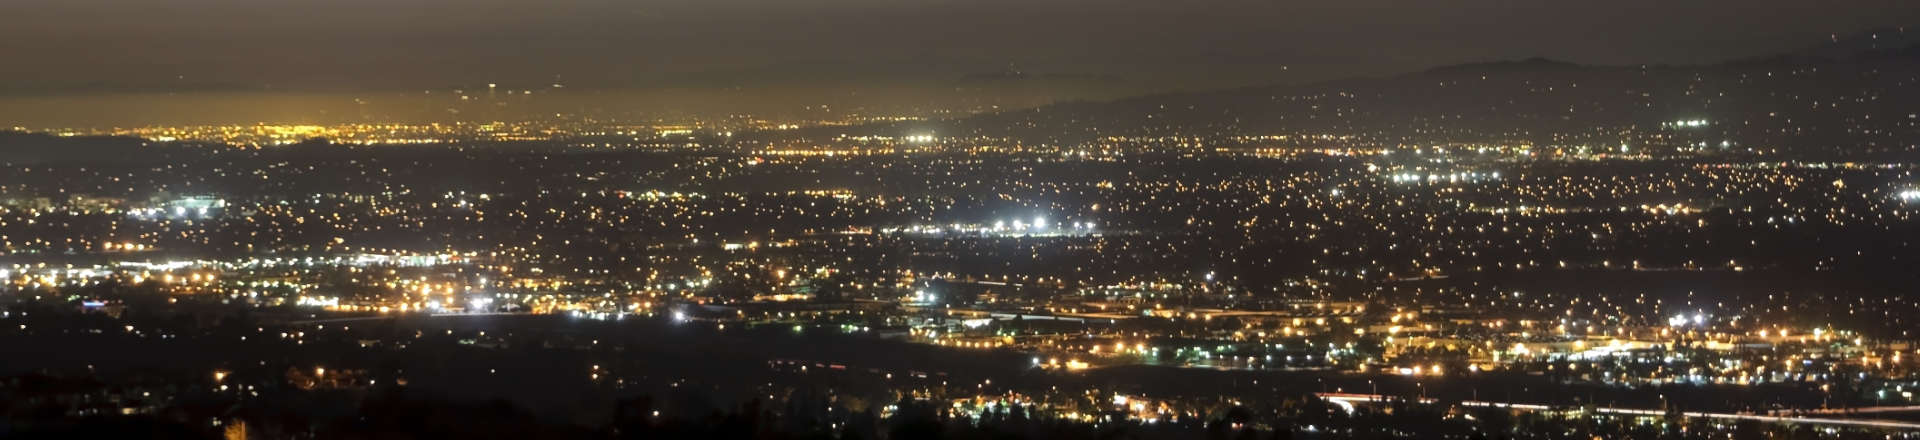 aerial view of Anaheim, CA at night